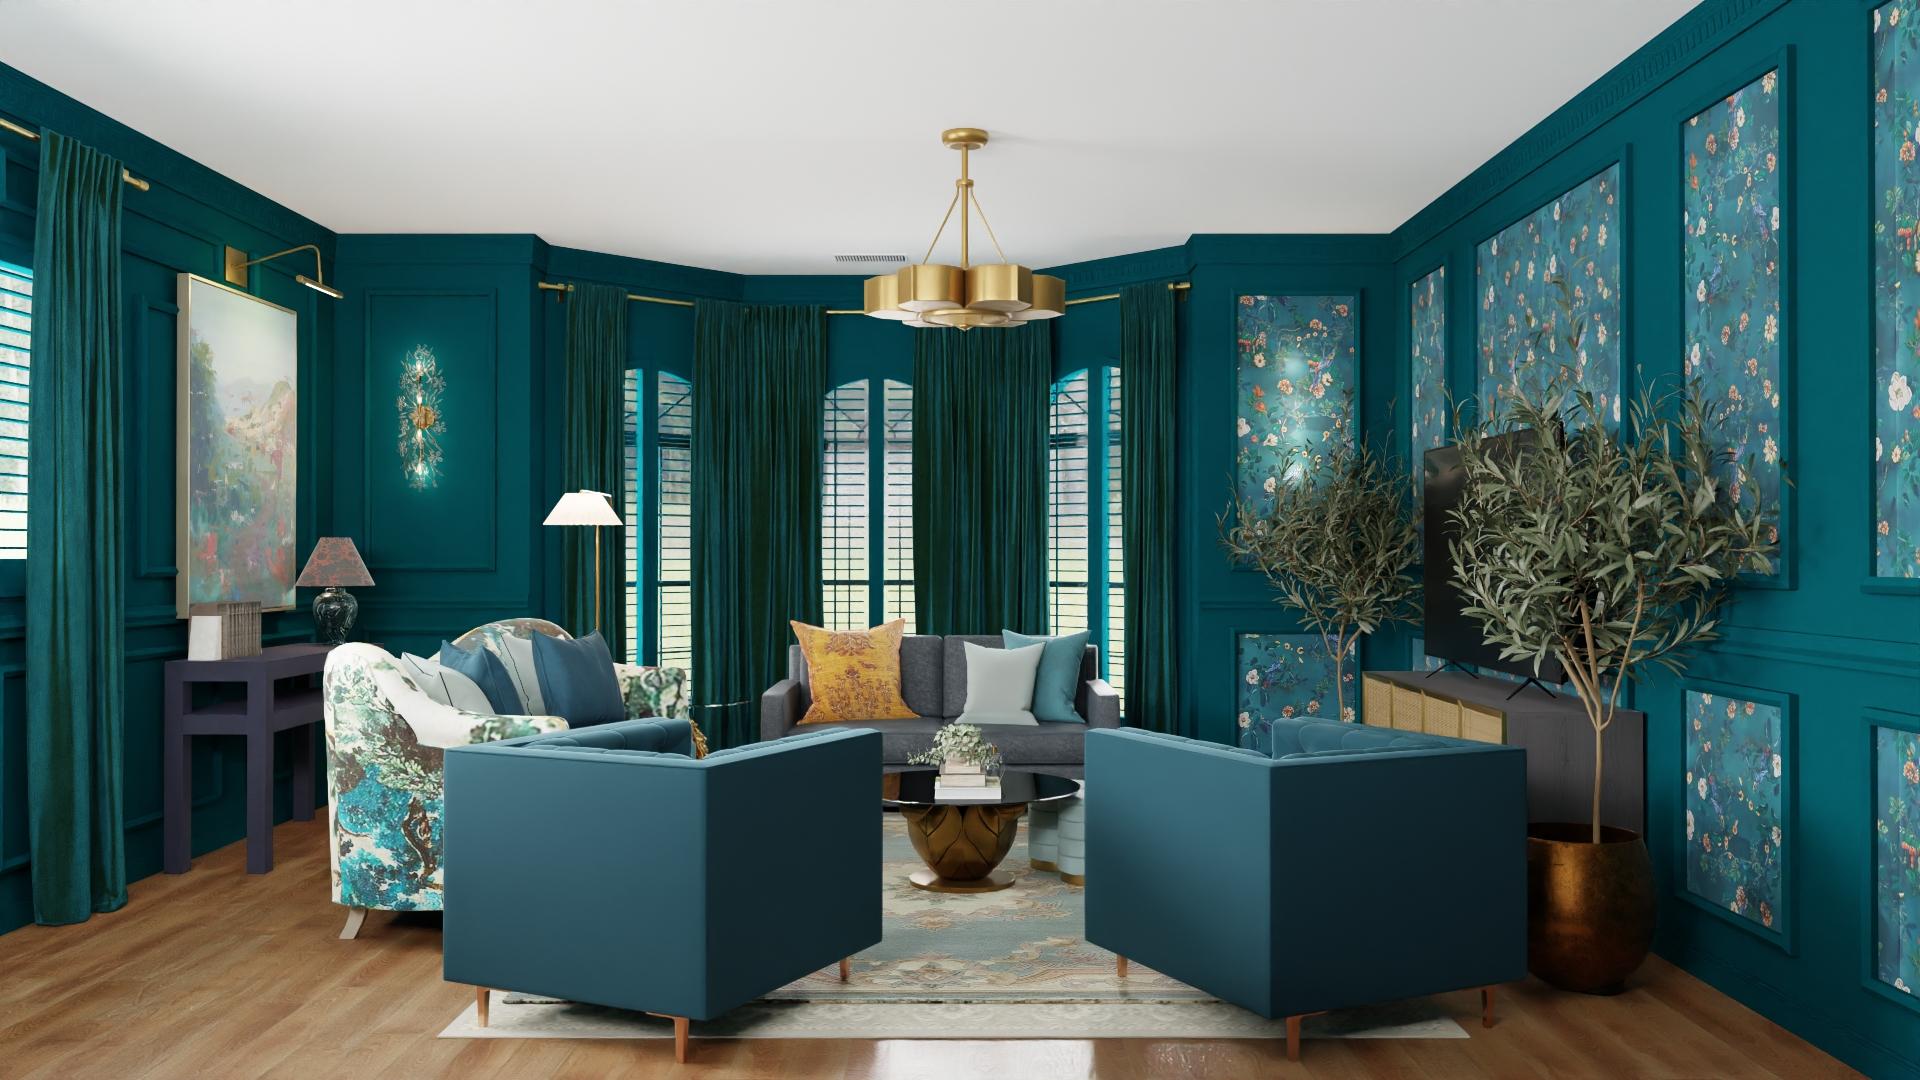 Eclectic Glam Living Room With Dark Turquoise Palette